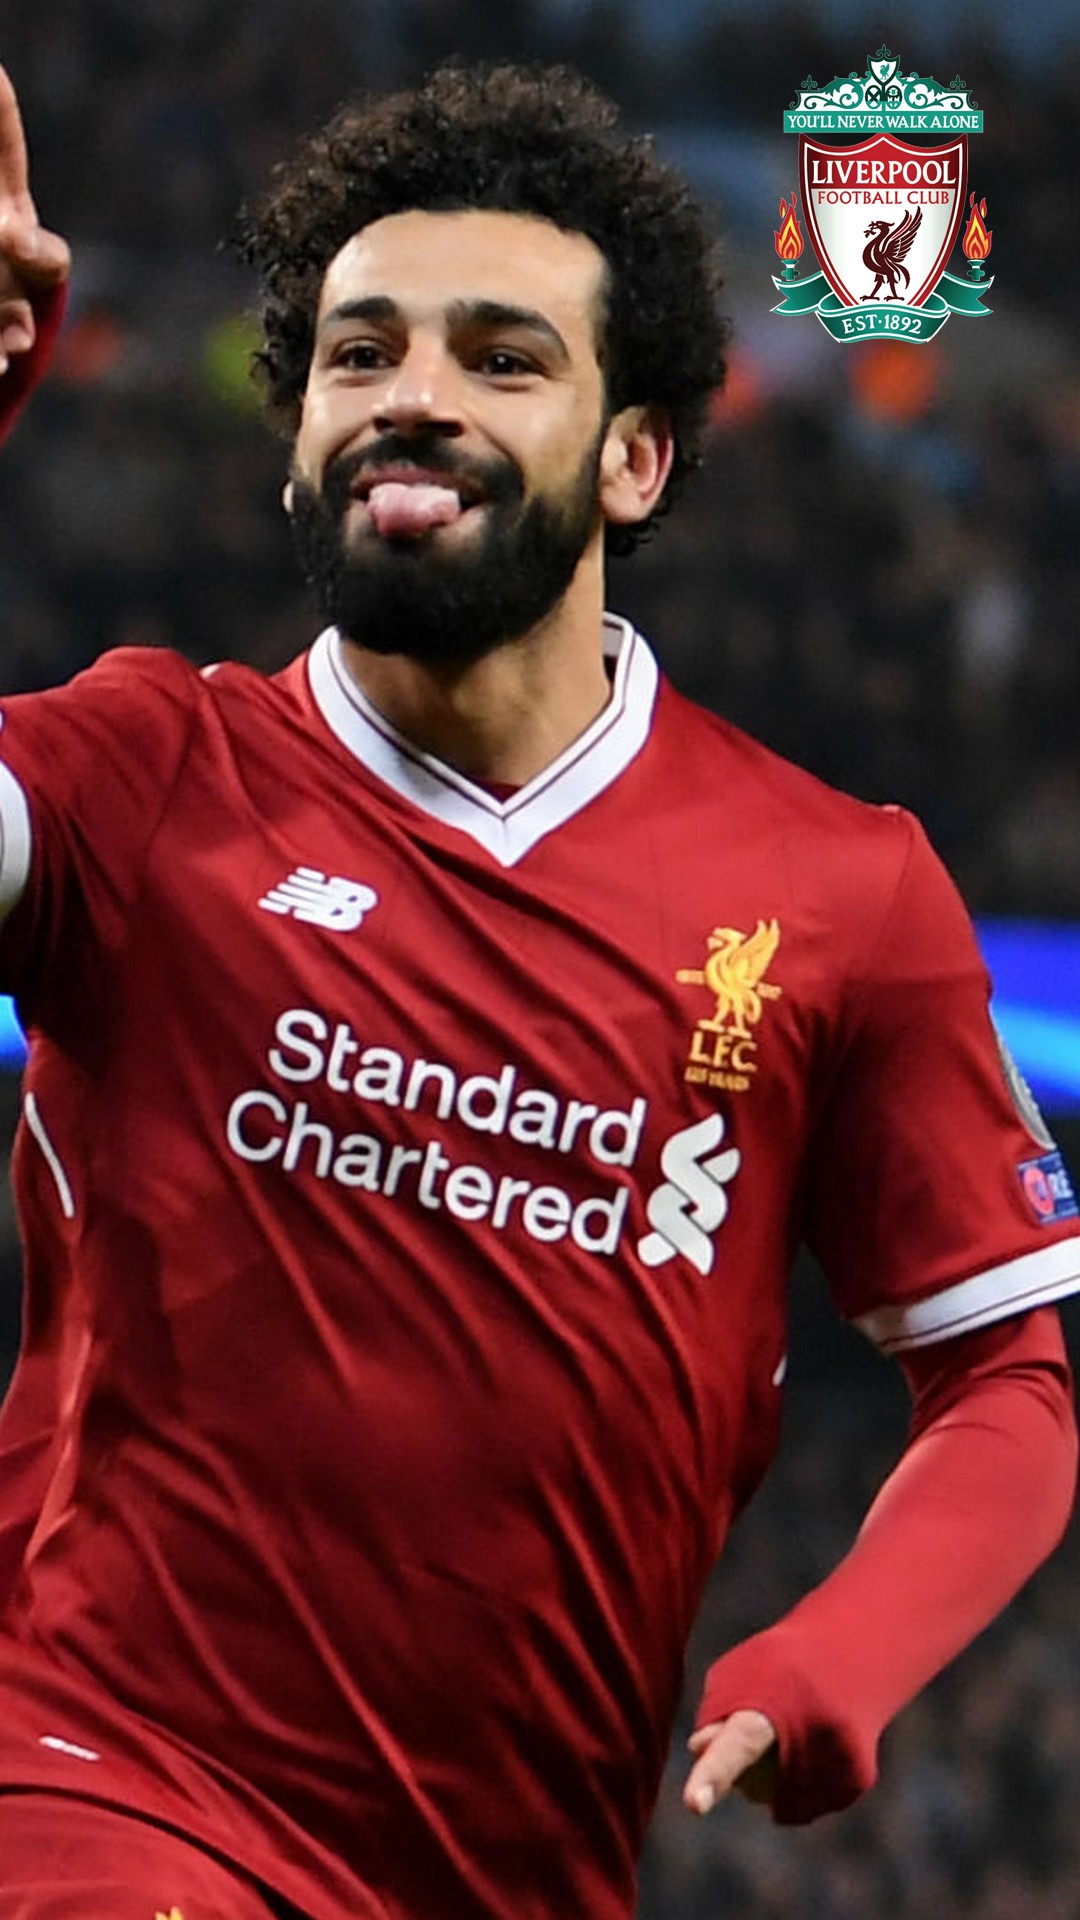 Mohamed Salah Wallpaper For Android with resolution 1080X1920 pixel. You can make this wallpaper for your Android backgrounds, Tablet, Smartphones Screensavers and Mobile Phone Lock Screen